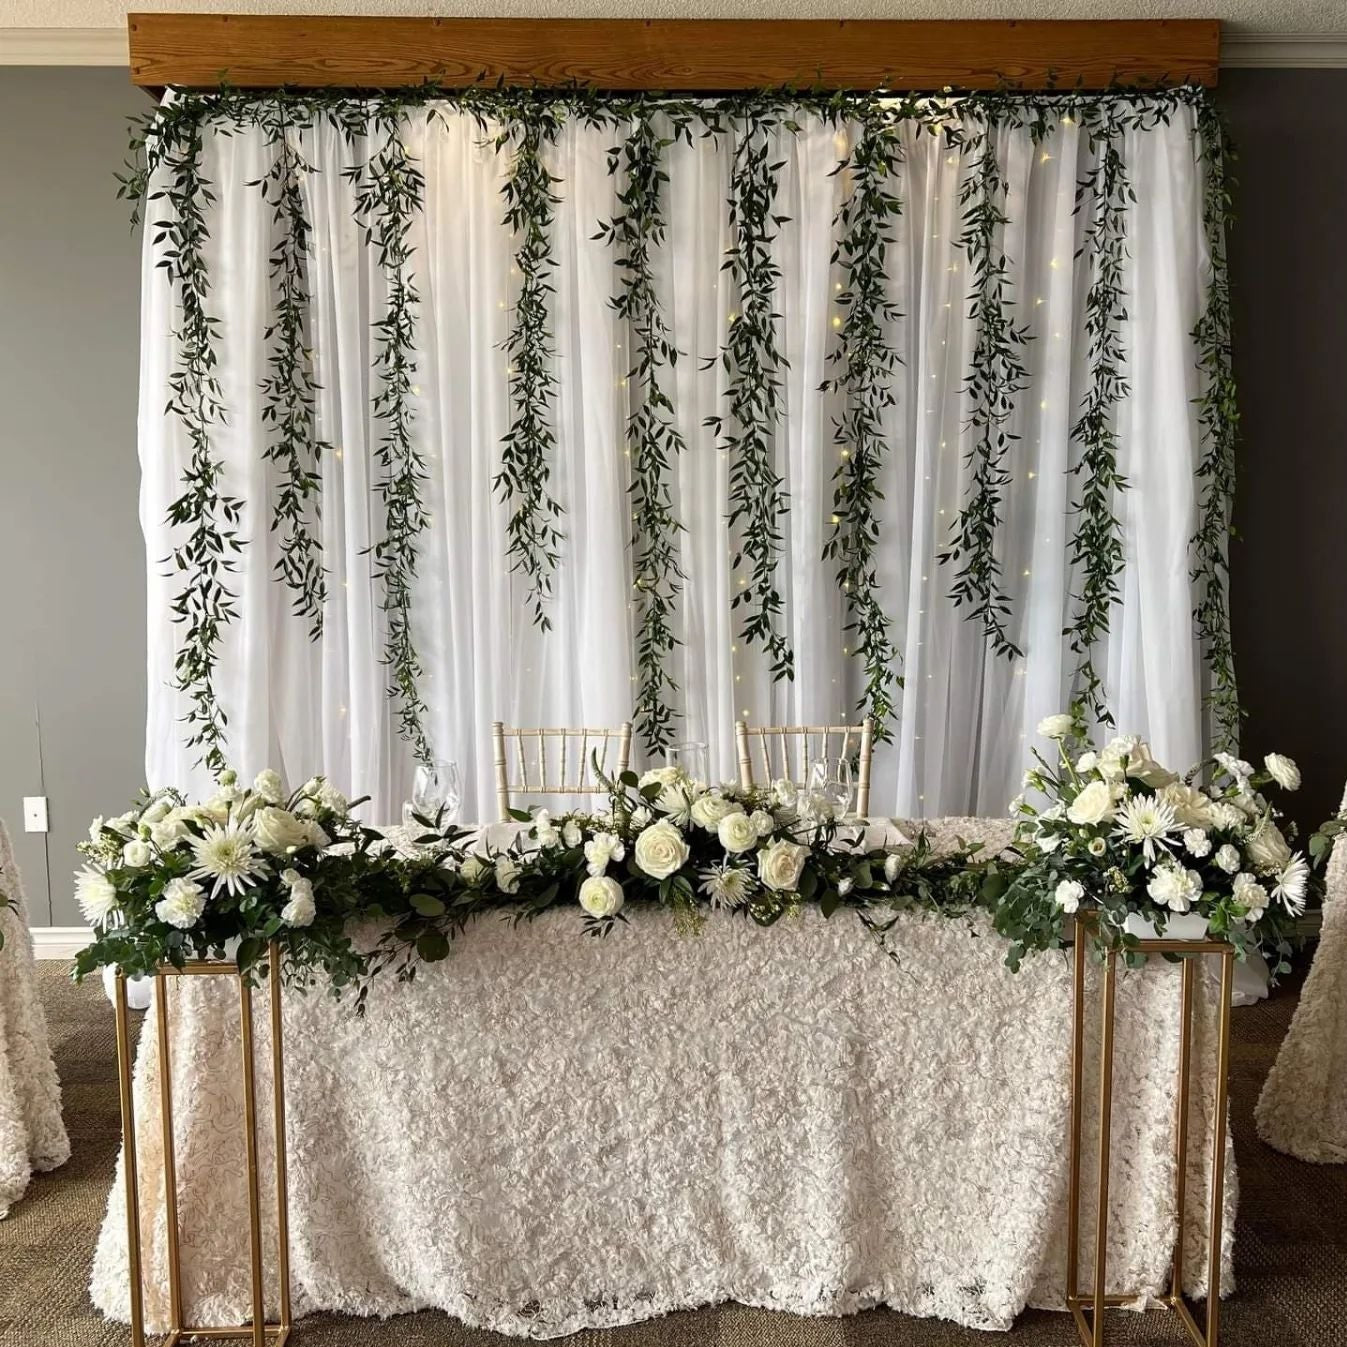 White drapes with trailing greenery